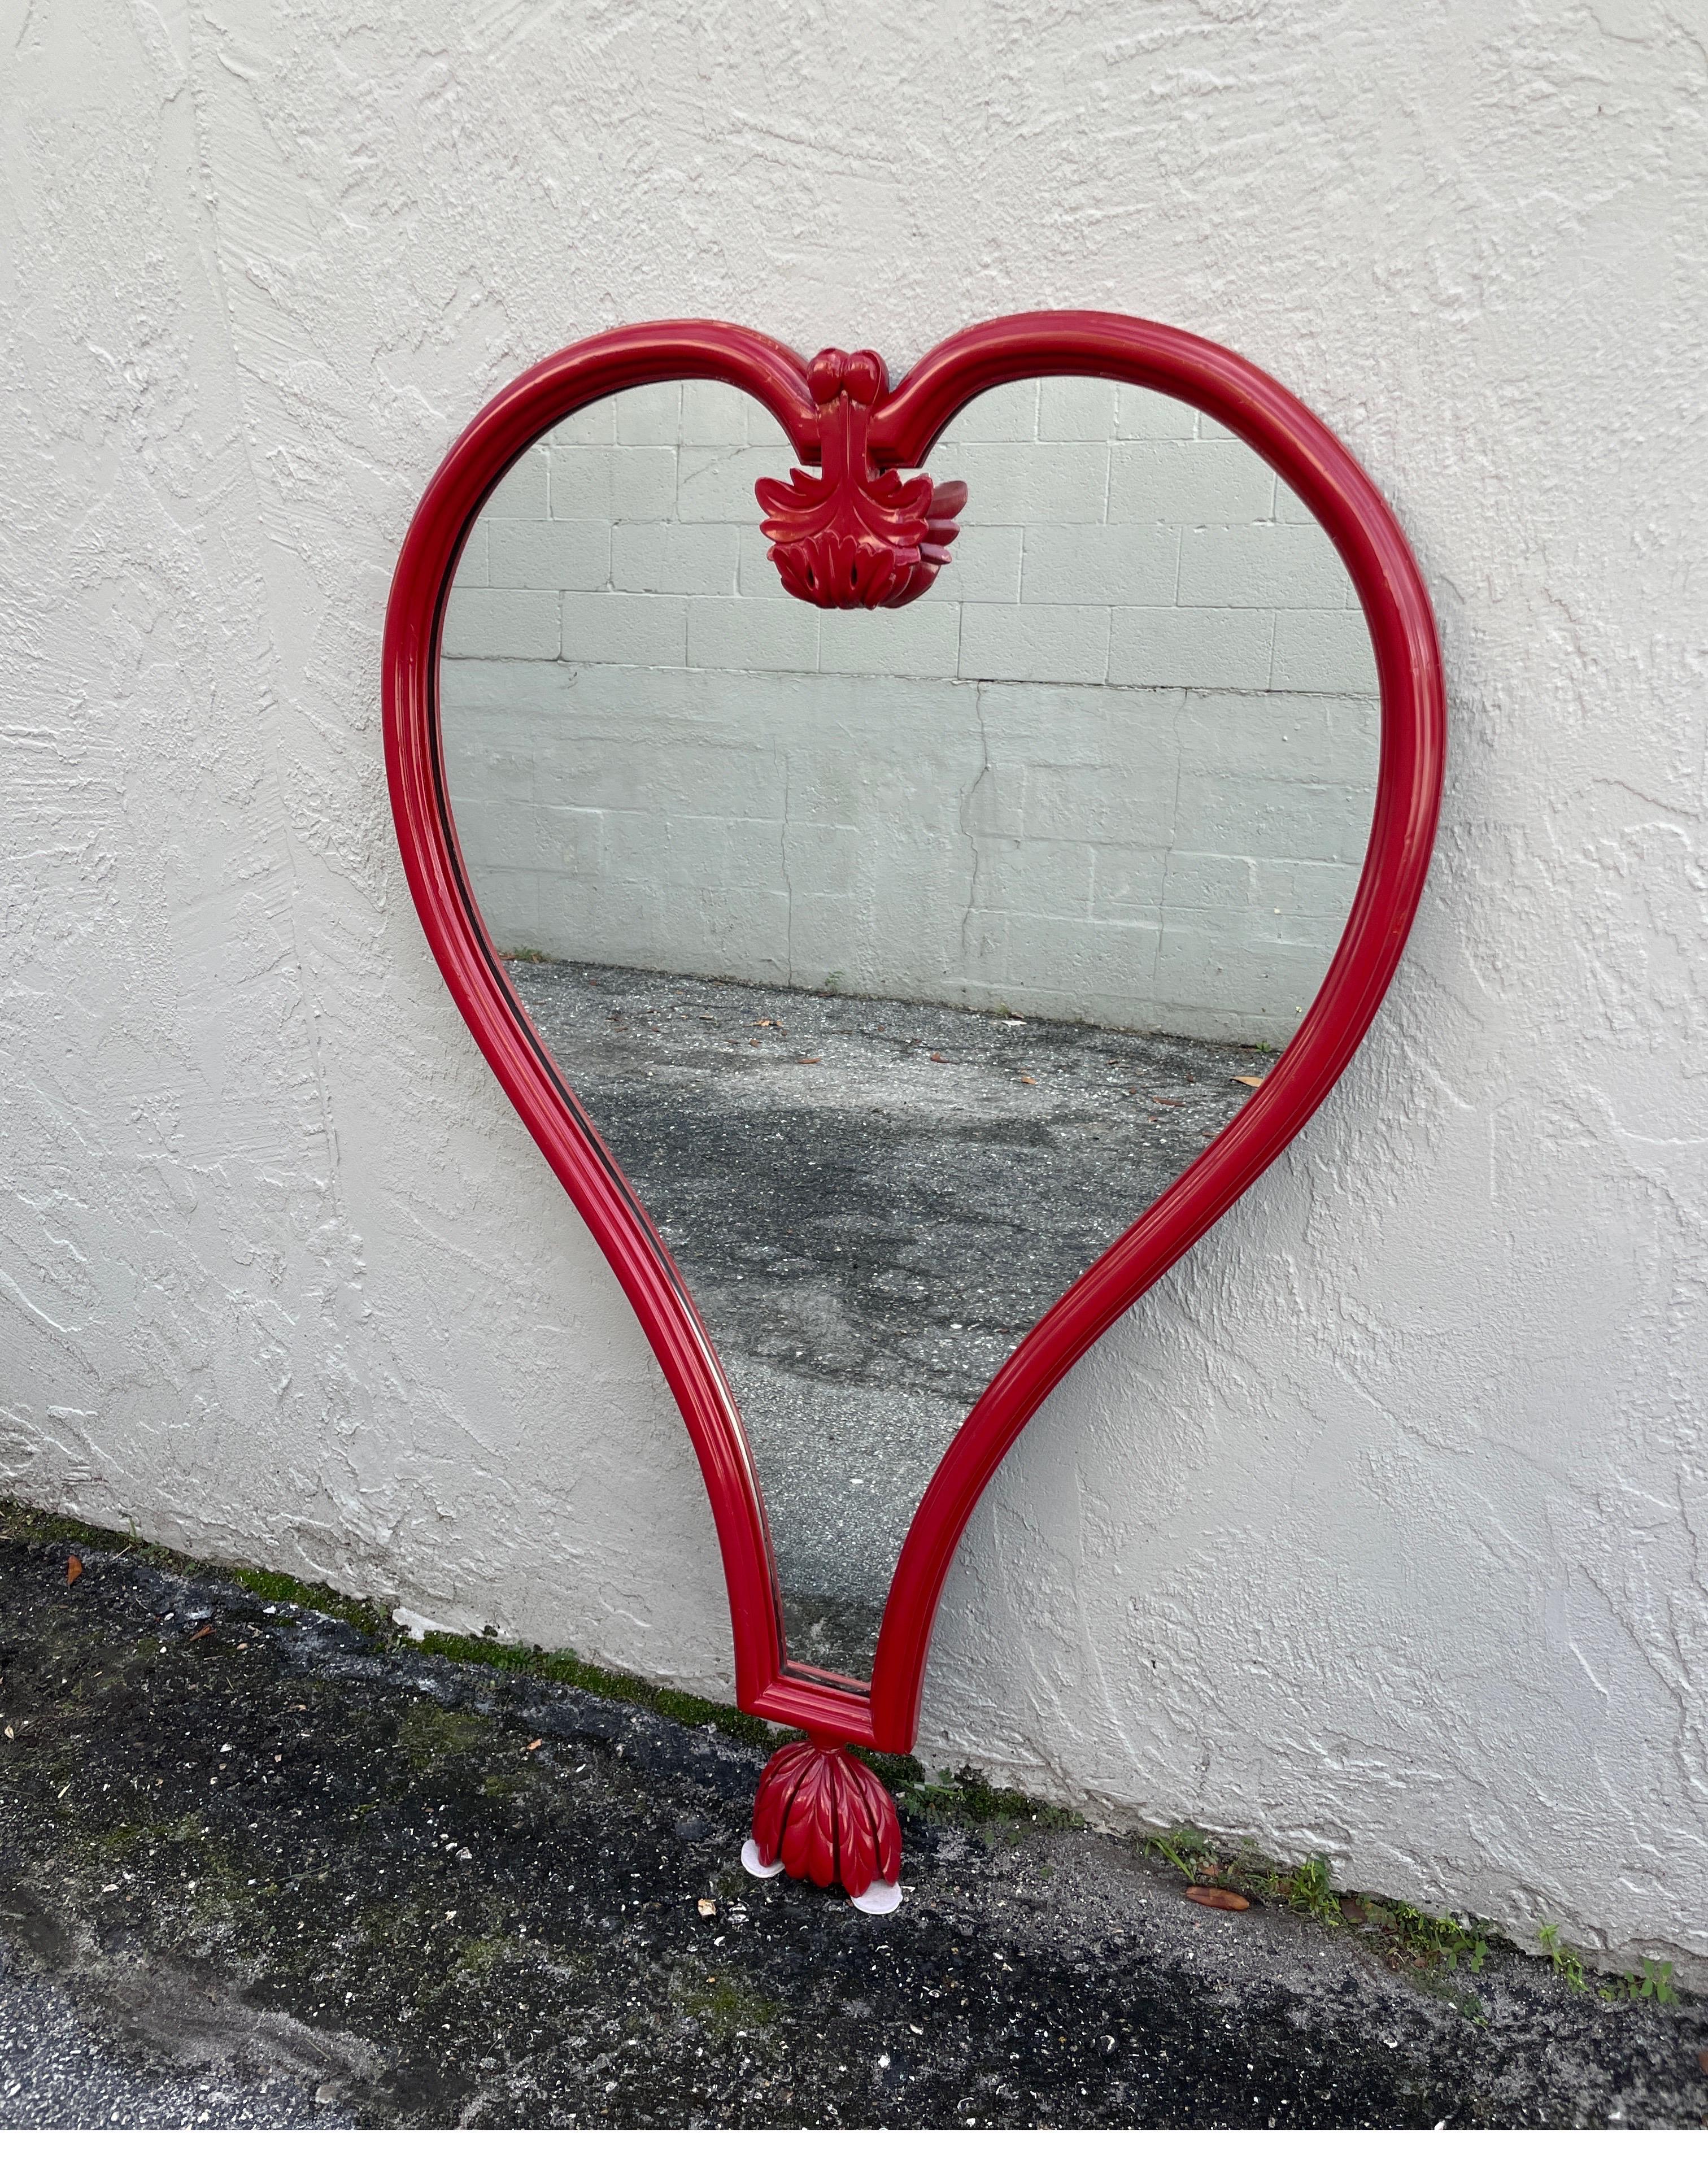 Parisian influenced Hollywood Regency Heart shaped mirror in a red lacquer finish. This very unique mirror is very chic and quite unusual.